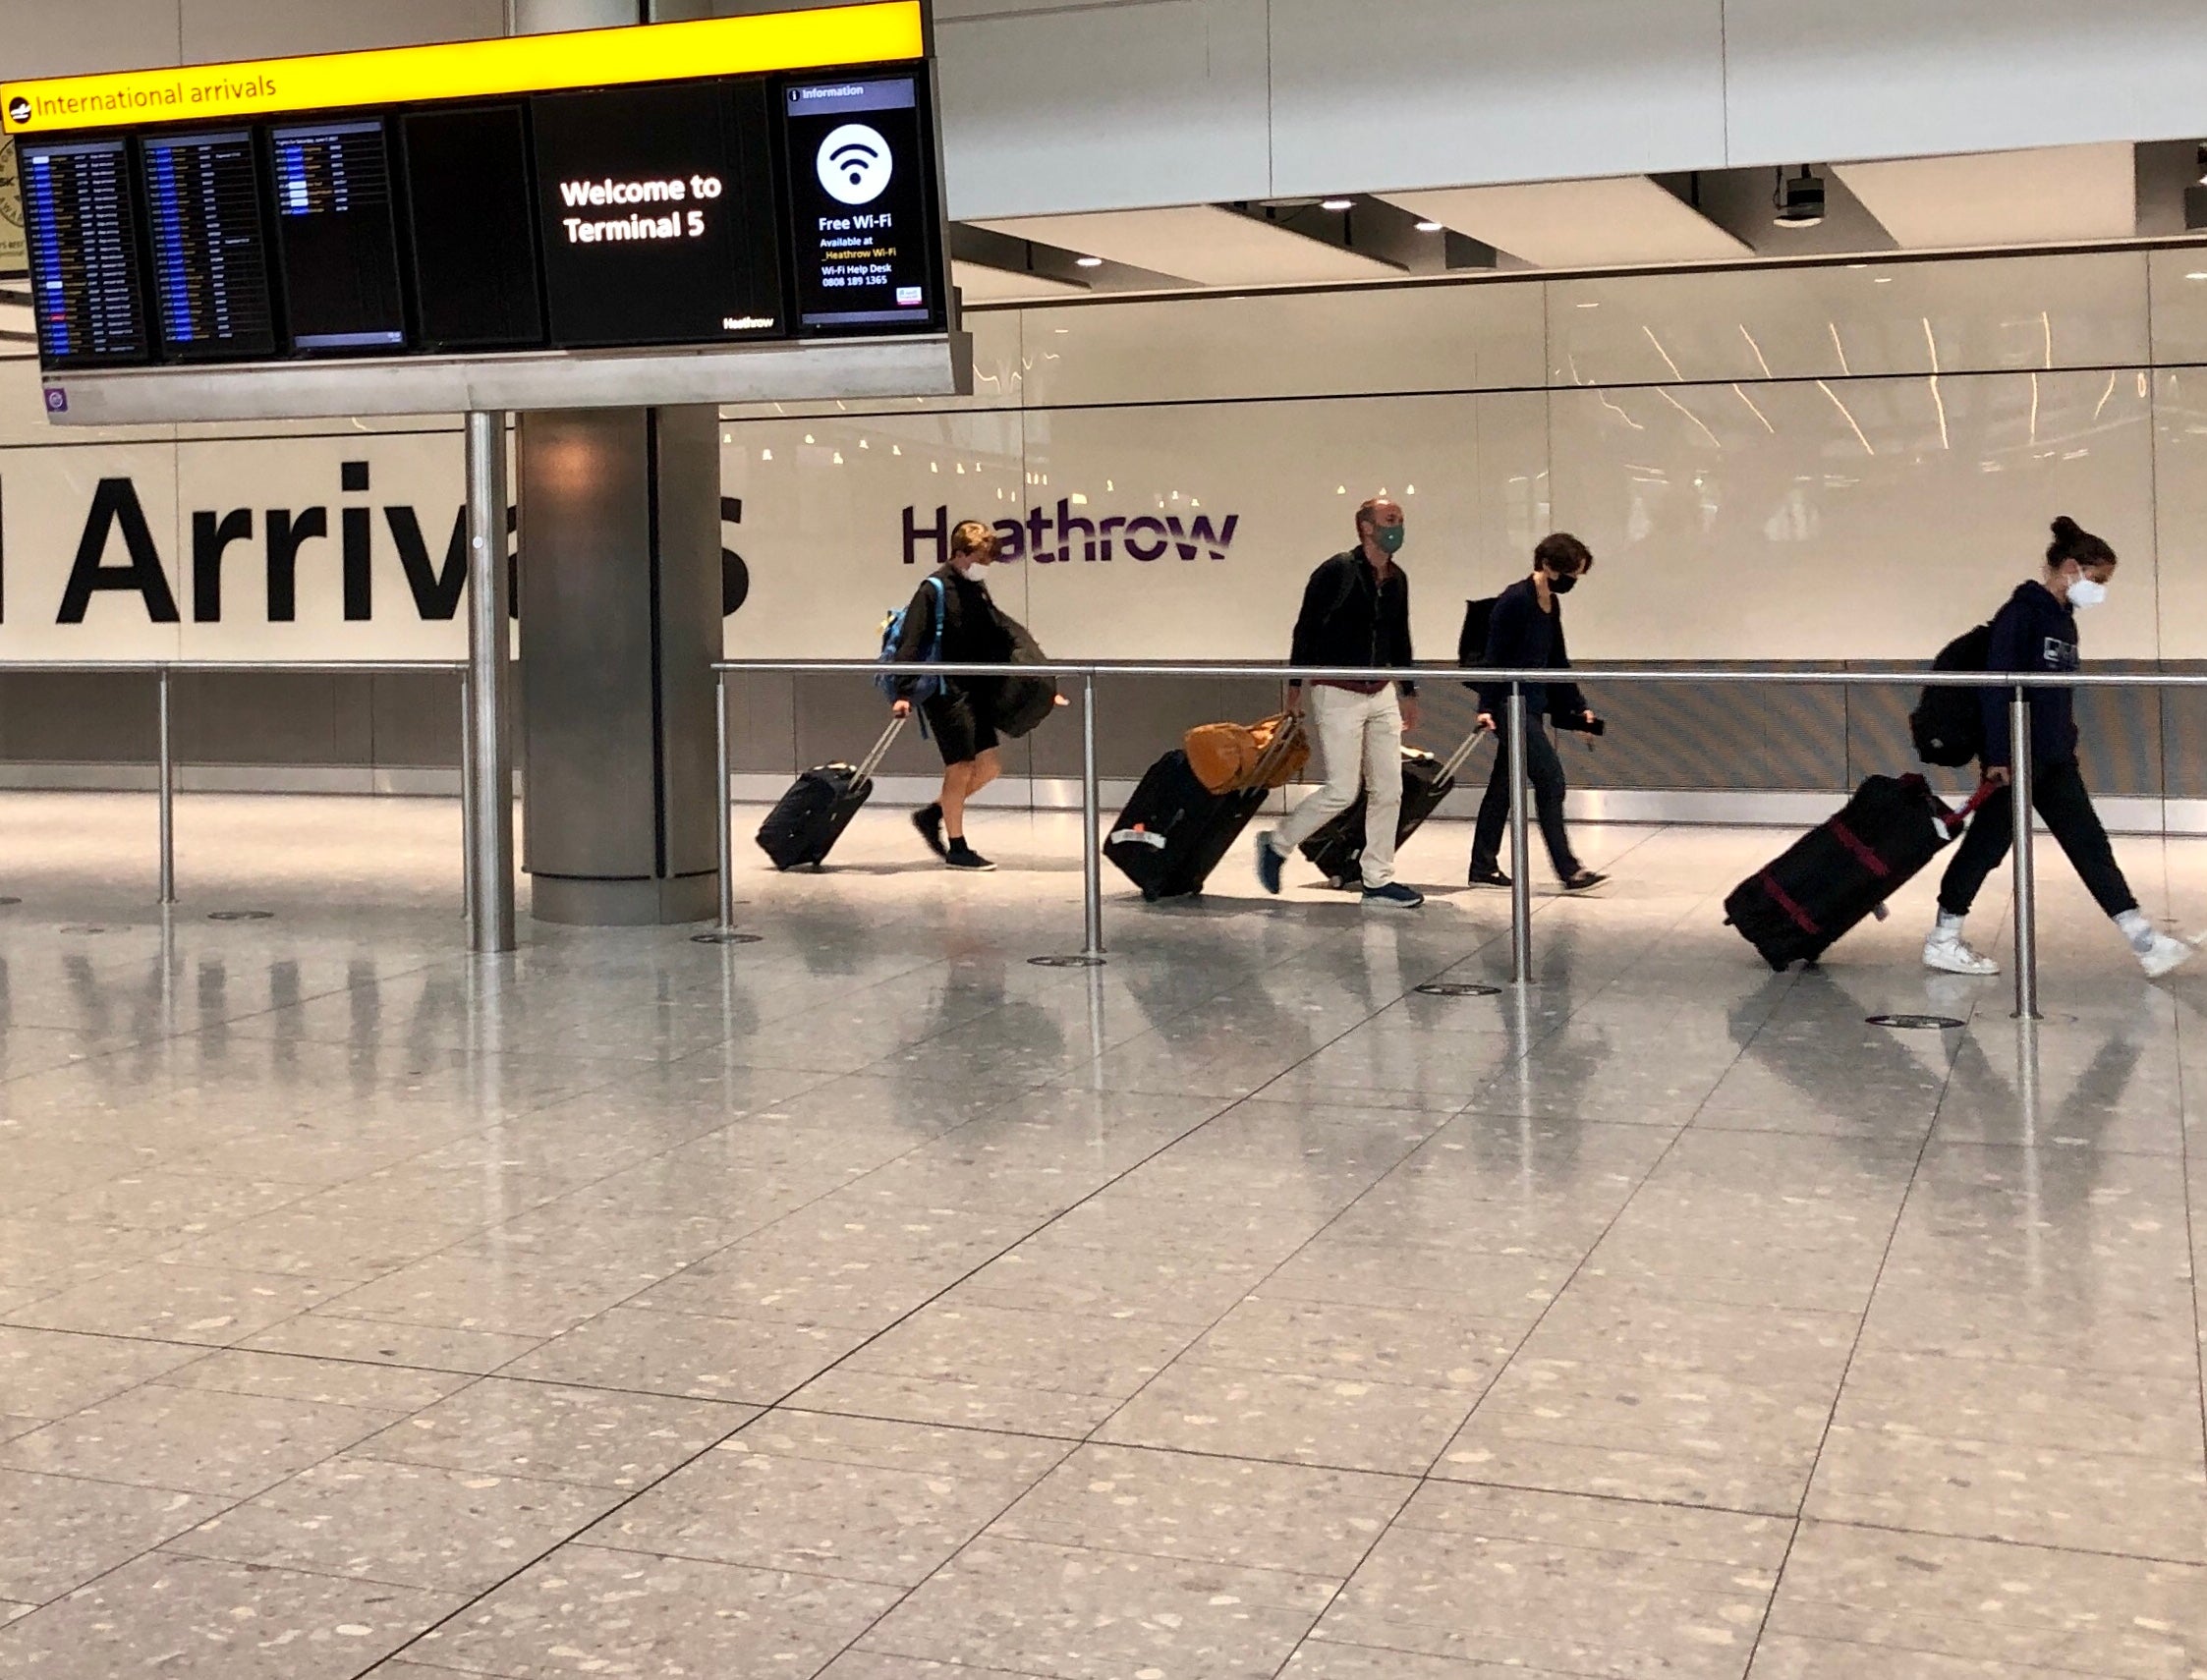 Welcome sight: arrivals at Heathrow airport Terminal 5